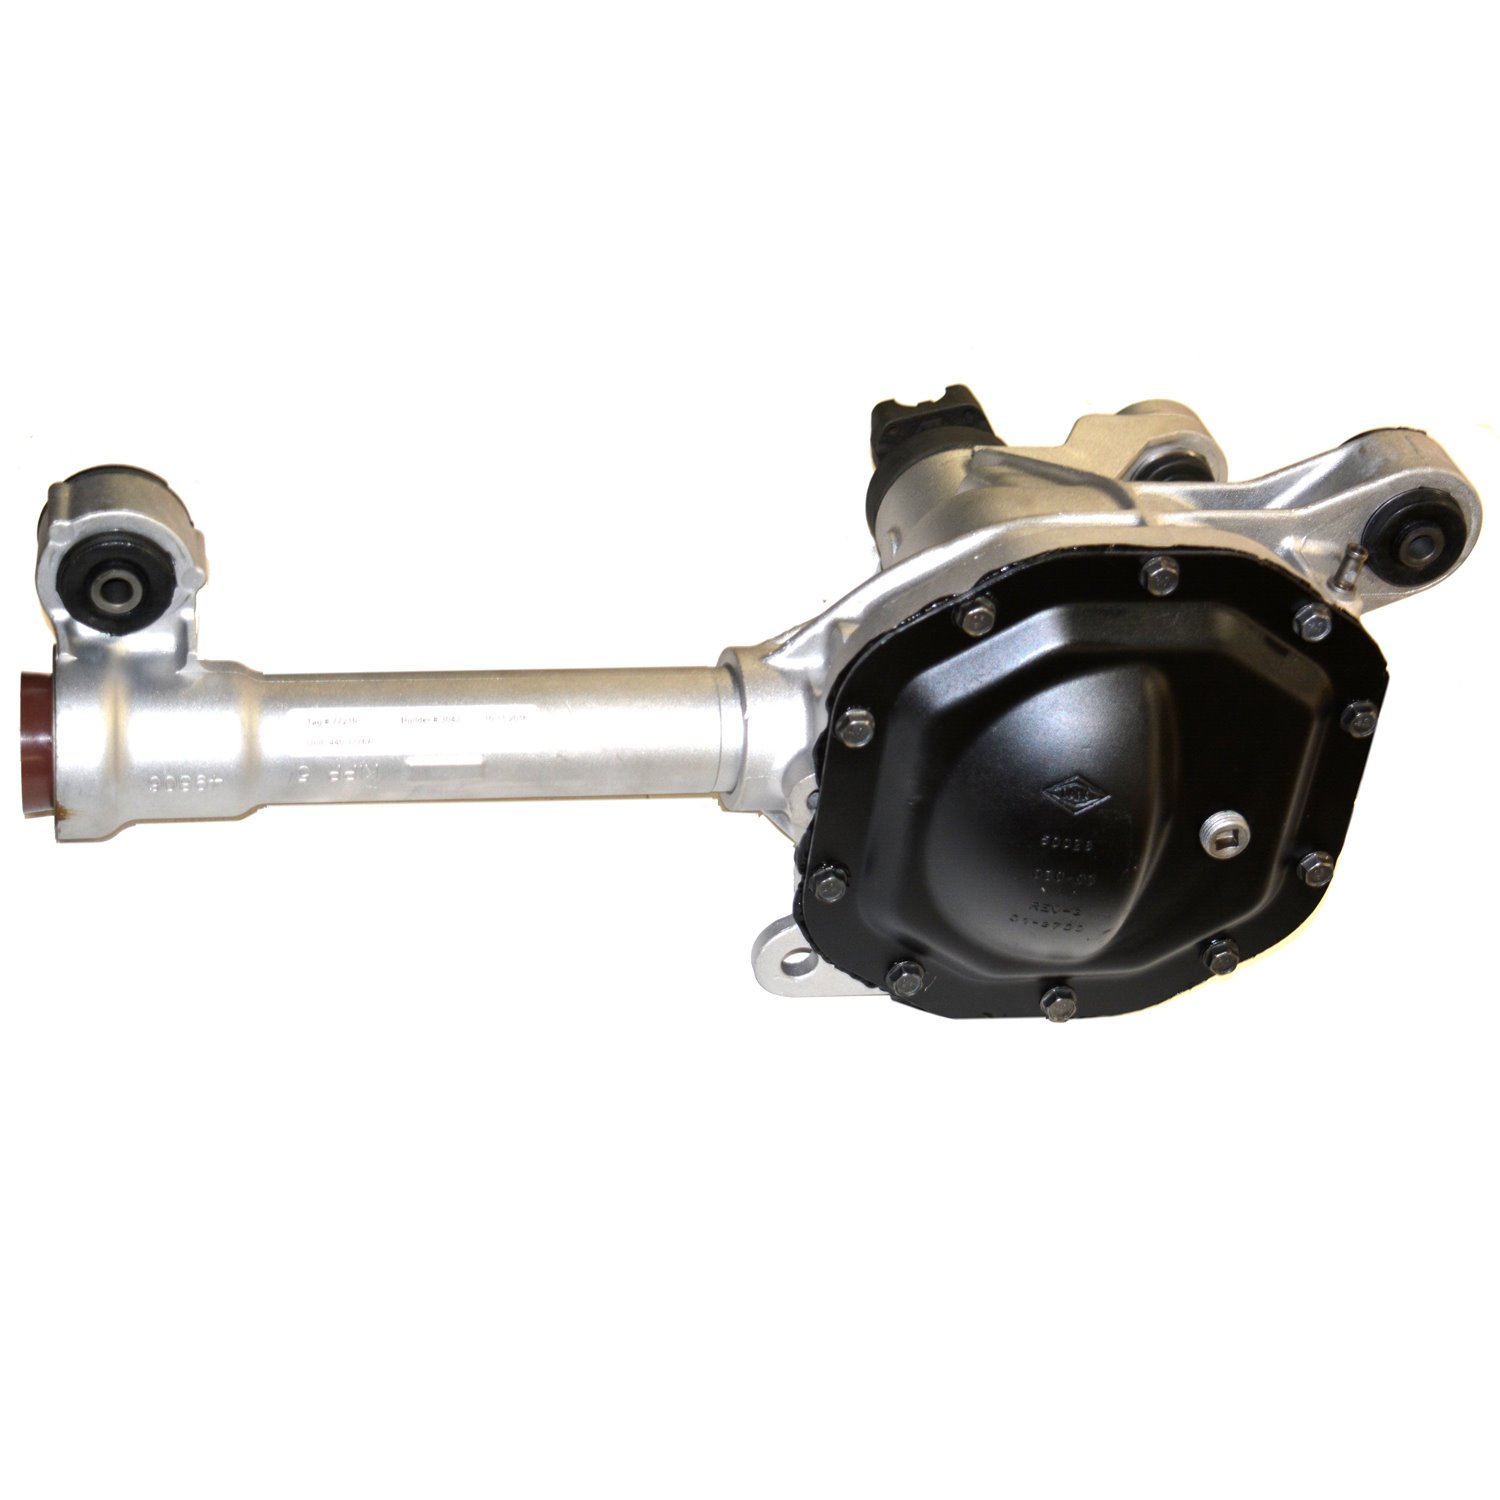 Remanufactured Axle Assembly for Dana 30 02-05 Ford Explorer 3.73 Ratio